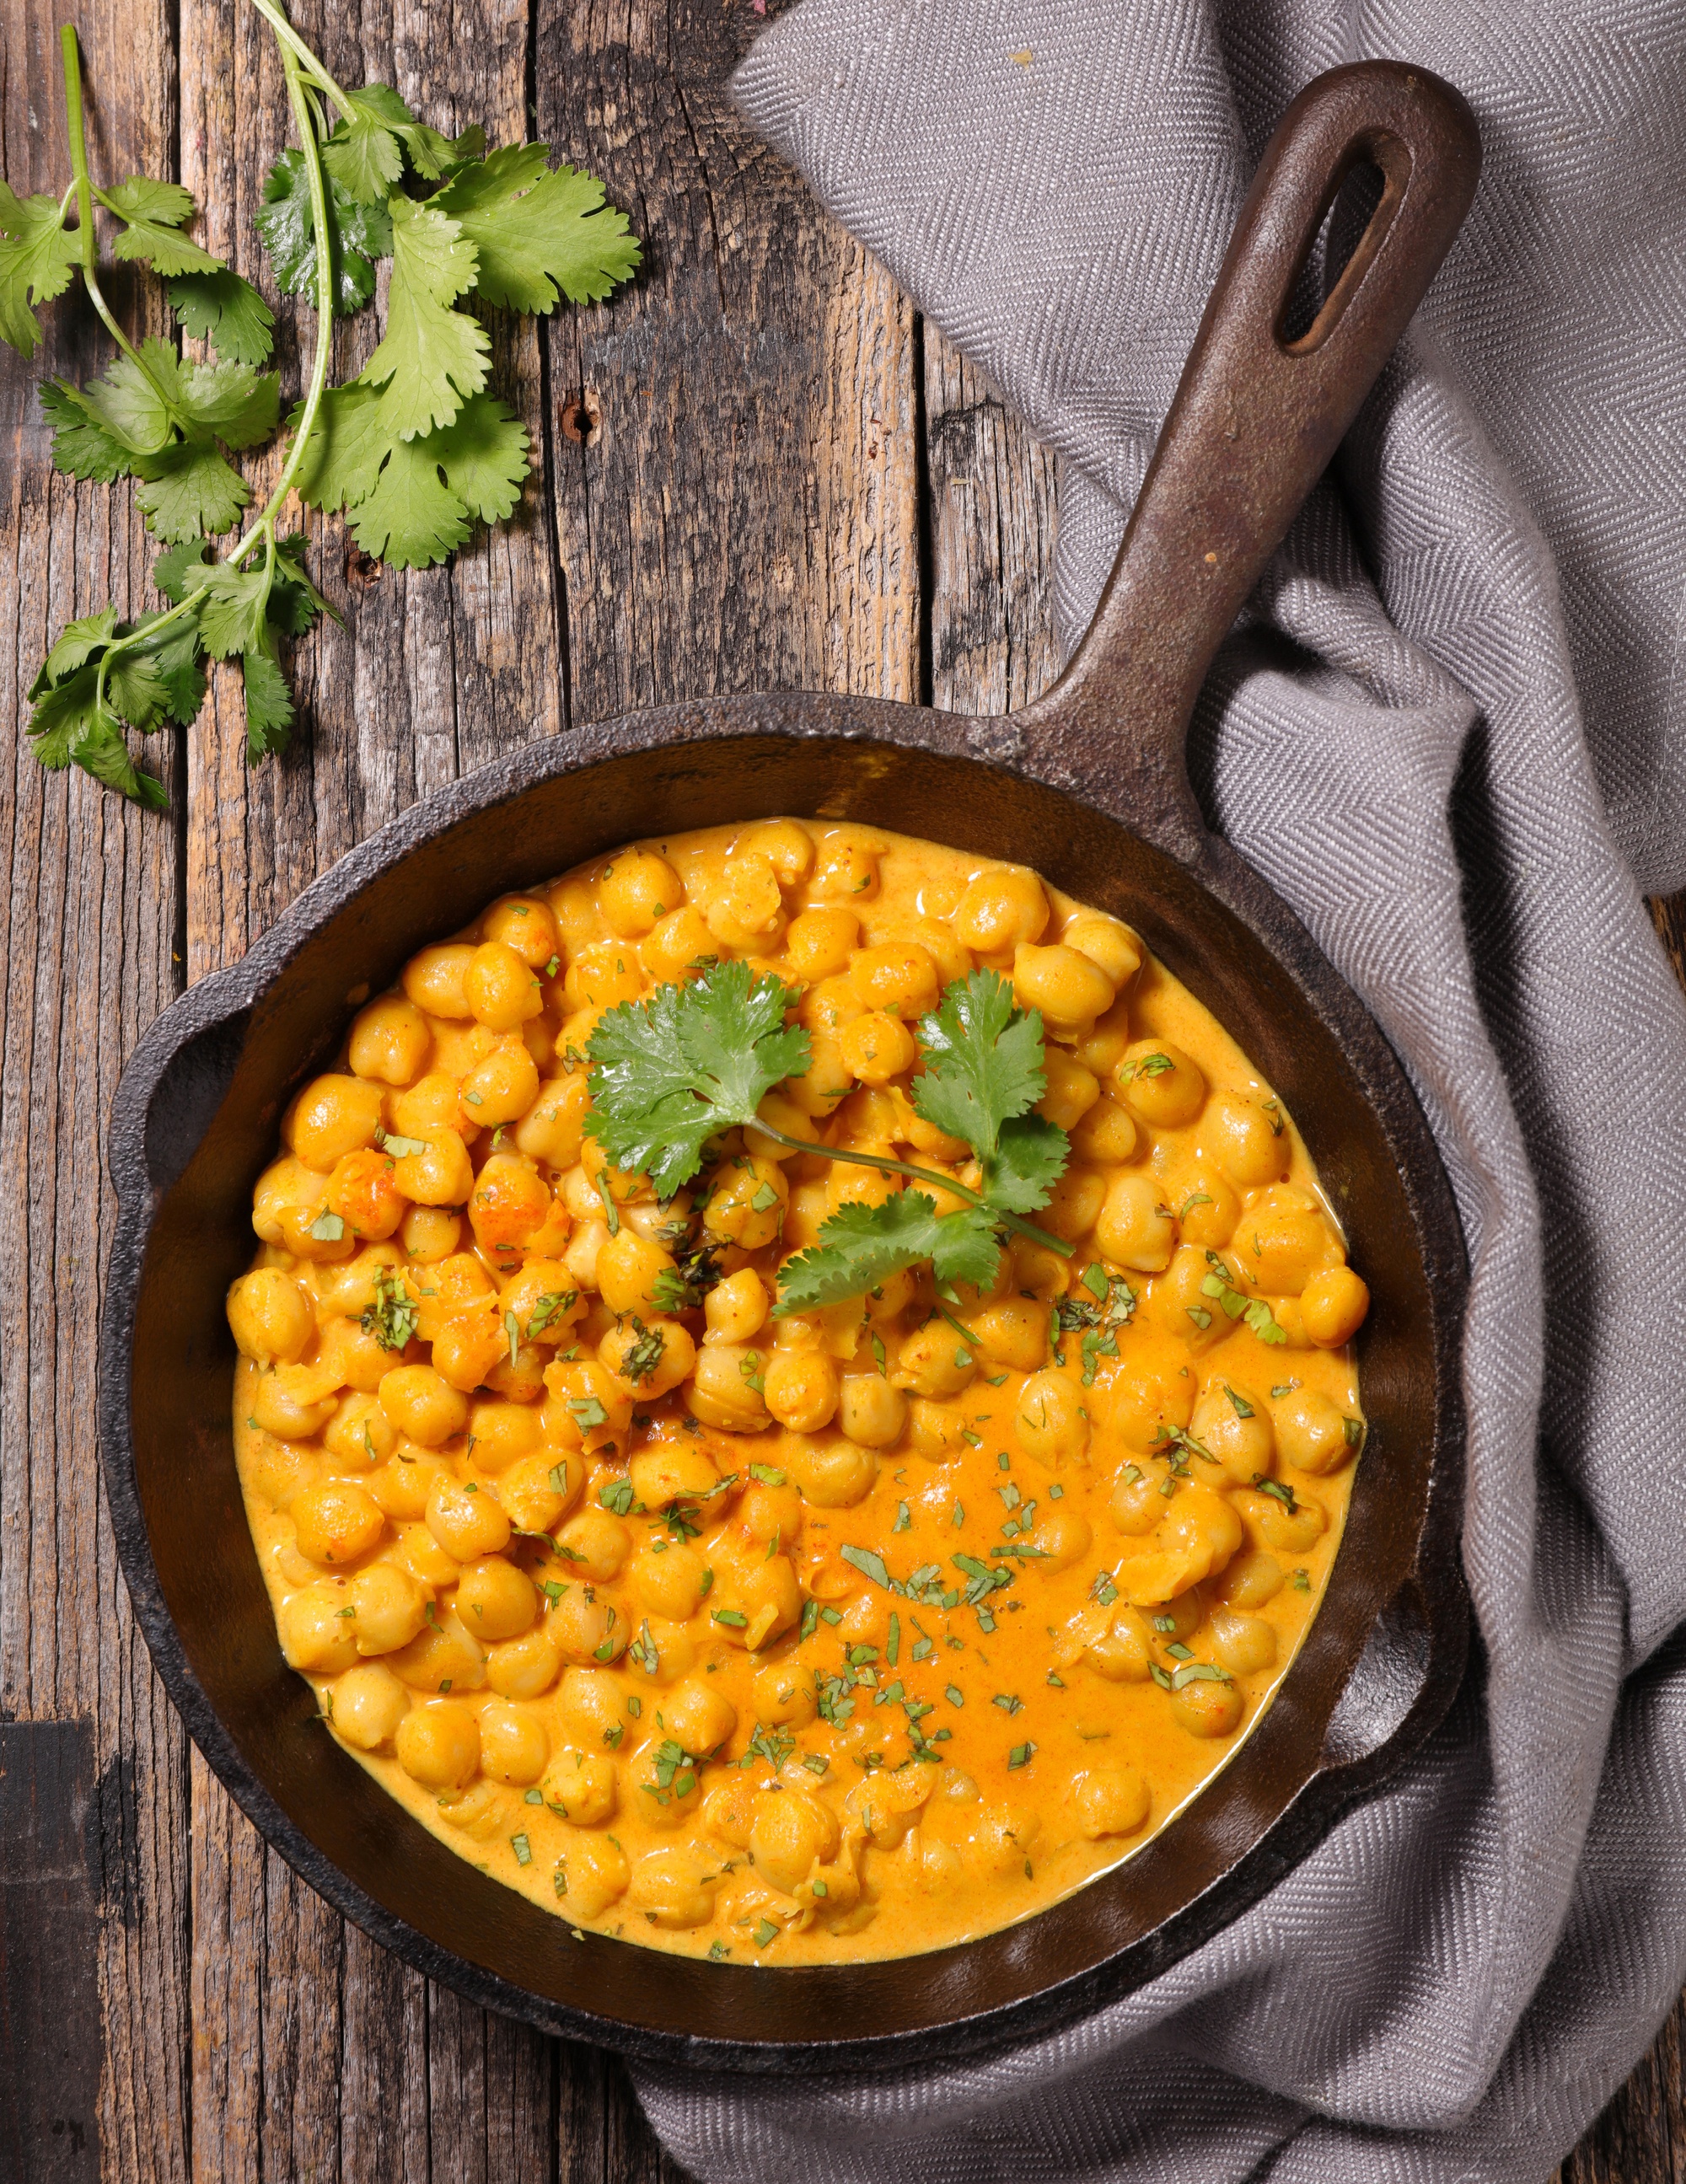 https://www.themaasclinic.com/wp-content/uploads/2020/03/Maas_Clinic_CocoChickpea_curry-scaled.jpg